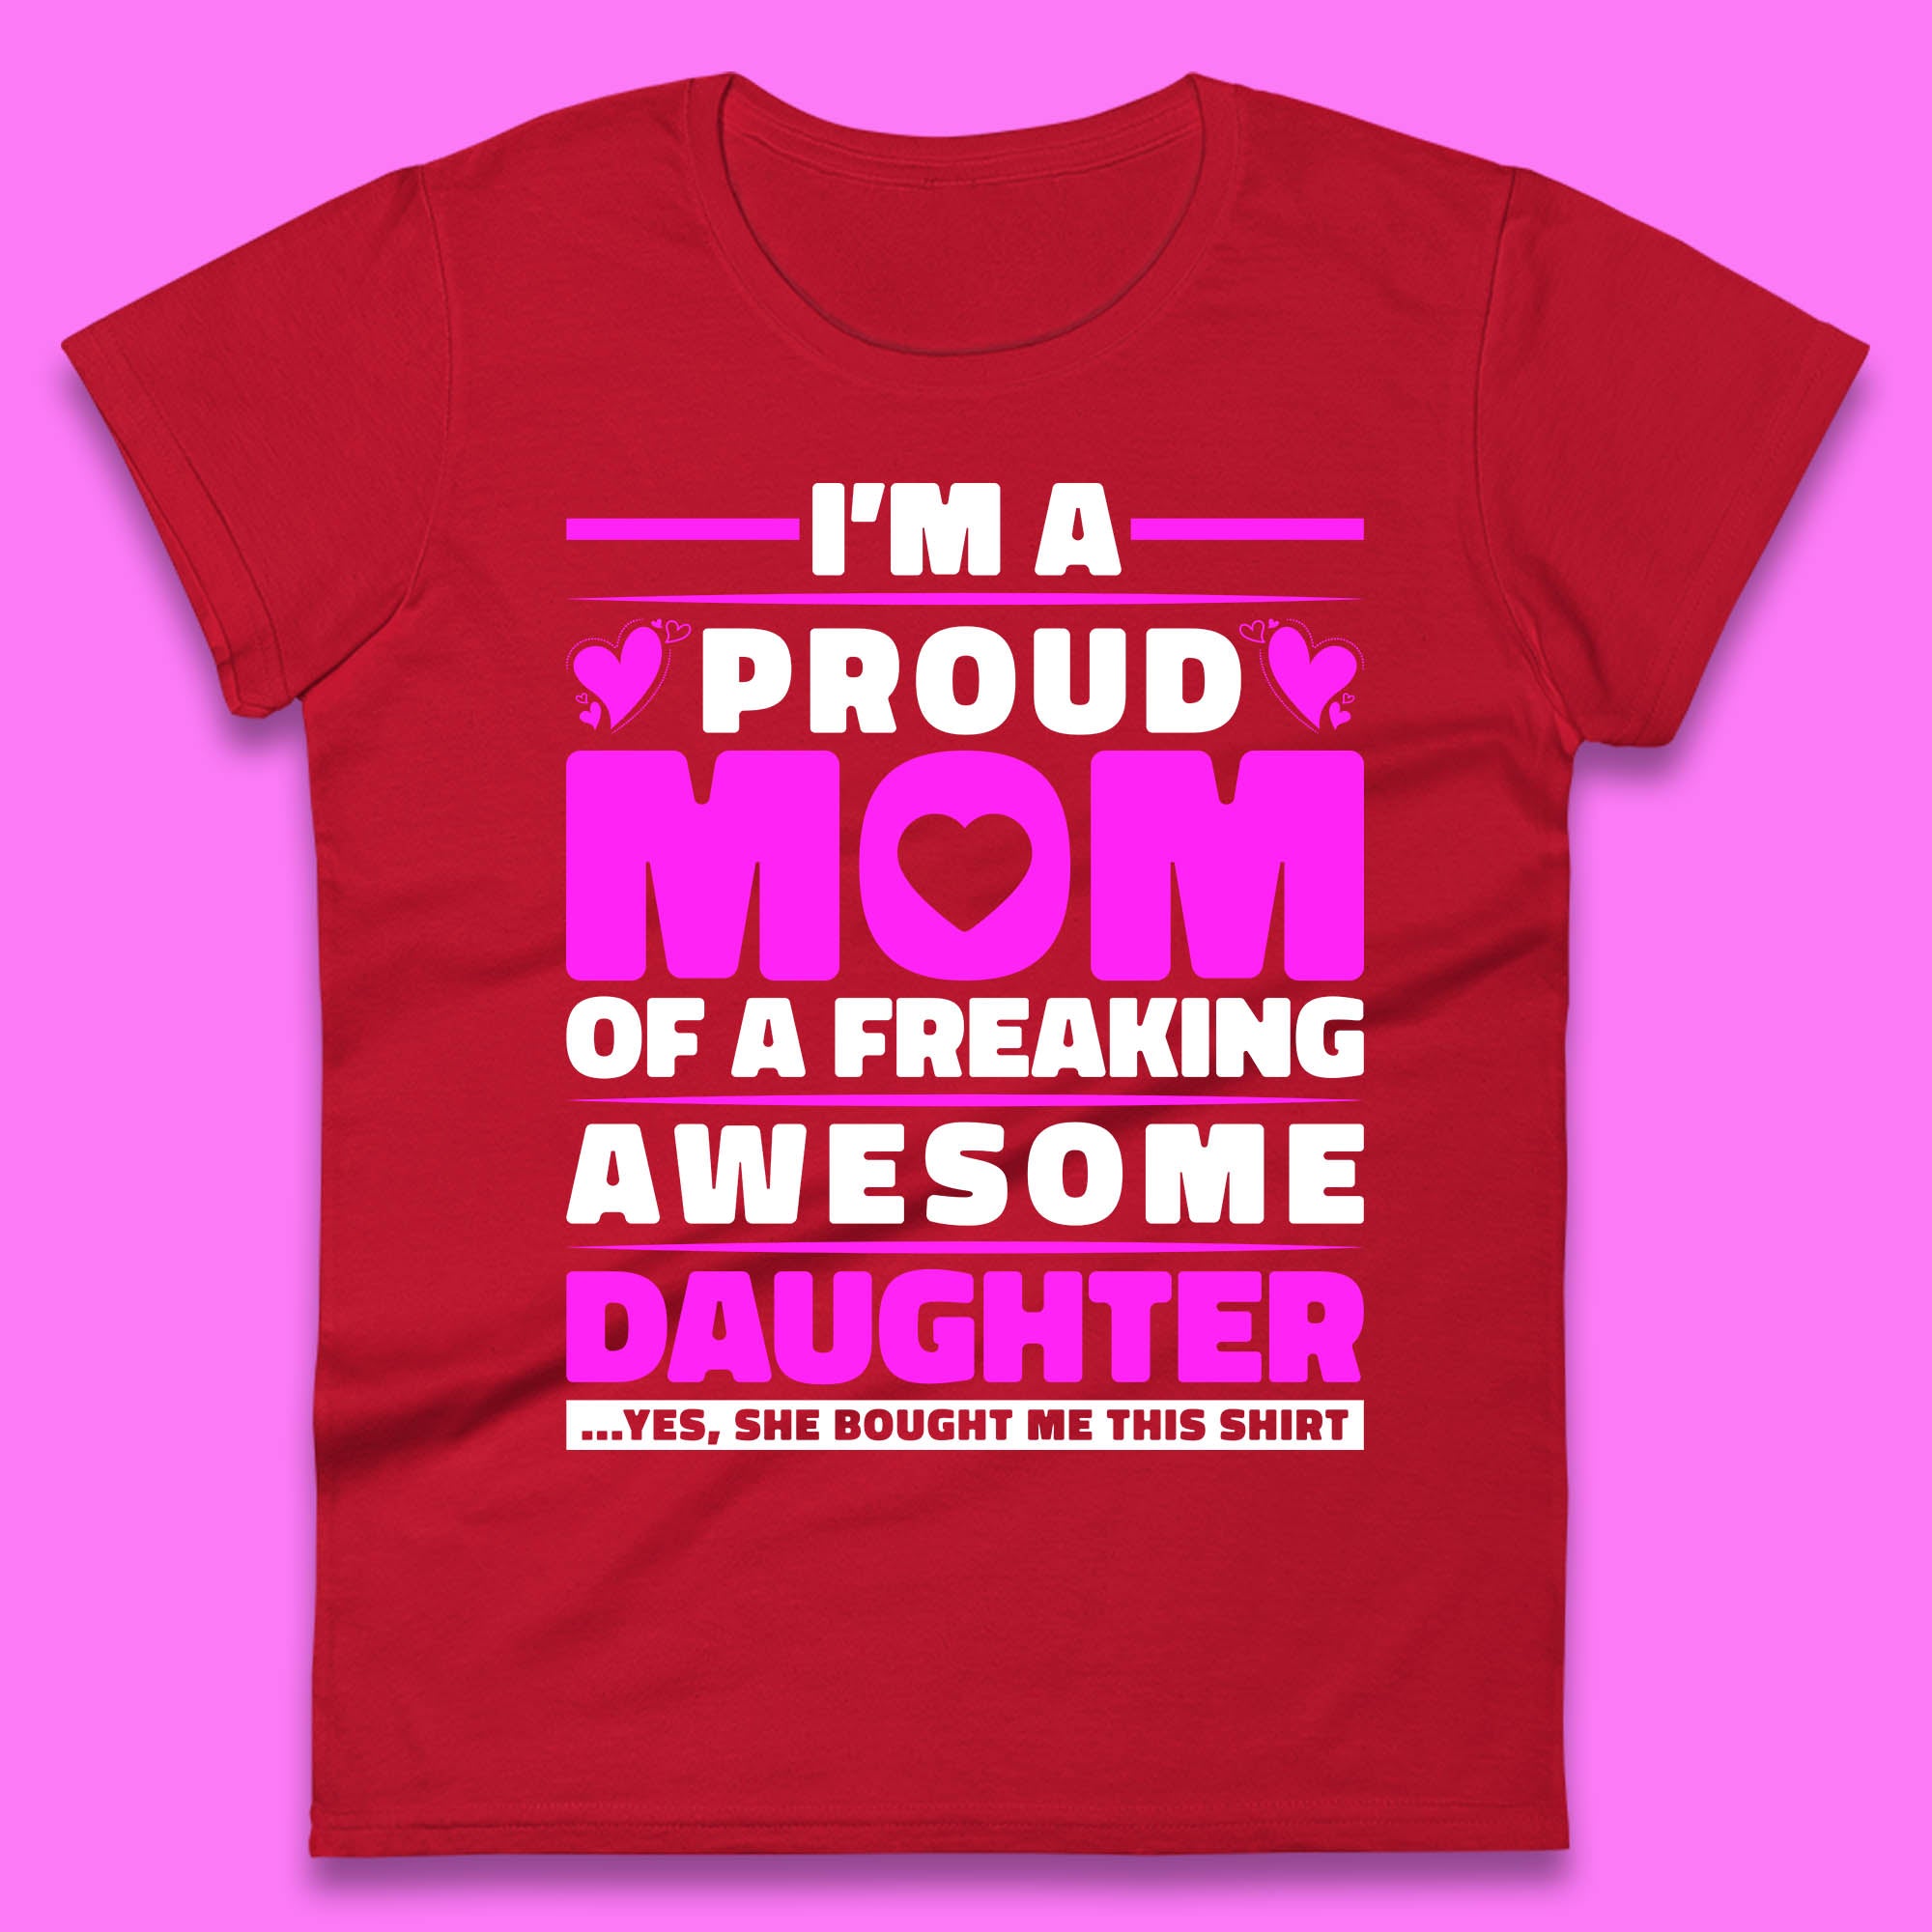 I'm A Proud Mom Of A Freaking Awesome Daughter Funny Womens Tee Top